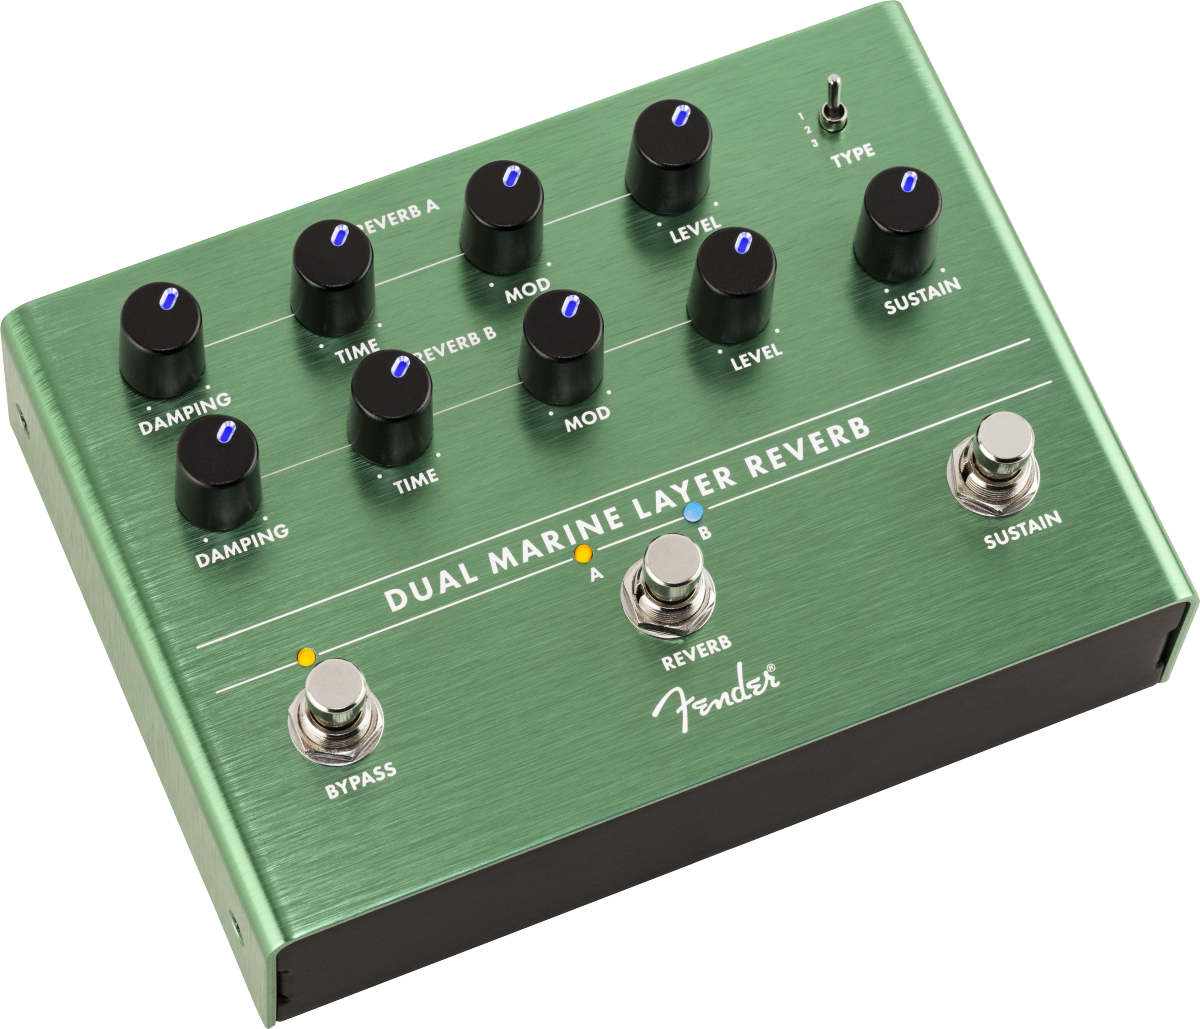 Fender Dual Marine Layer Reverb - Reverb, delay & echo effect pedal - Main picture